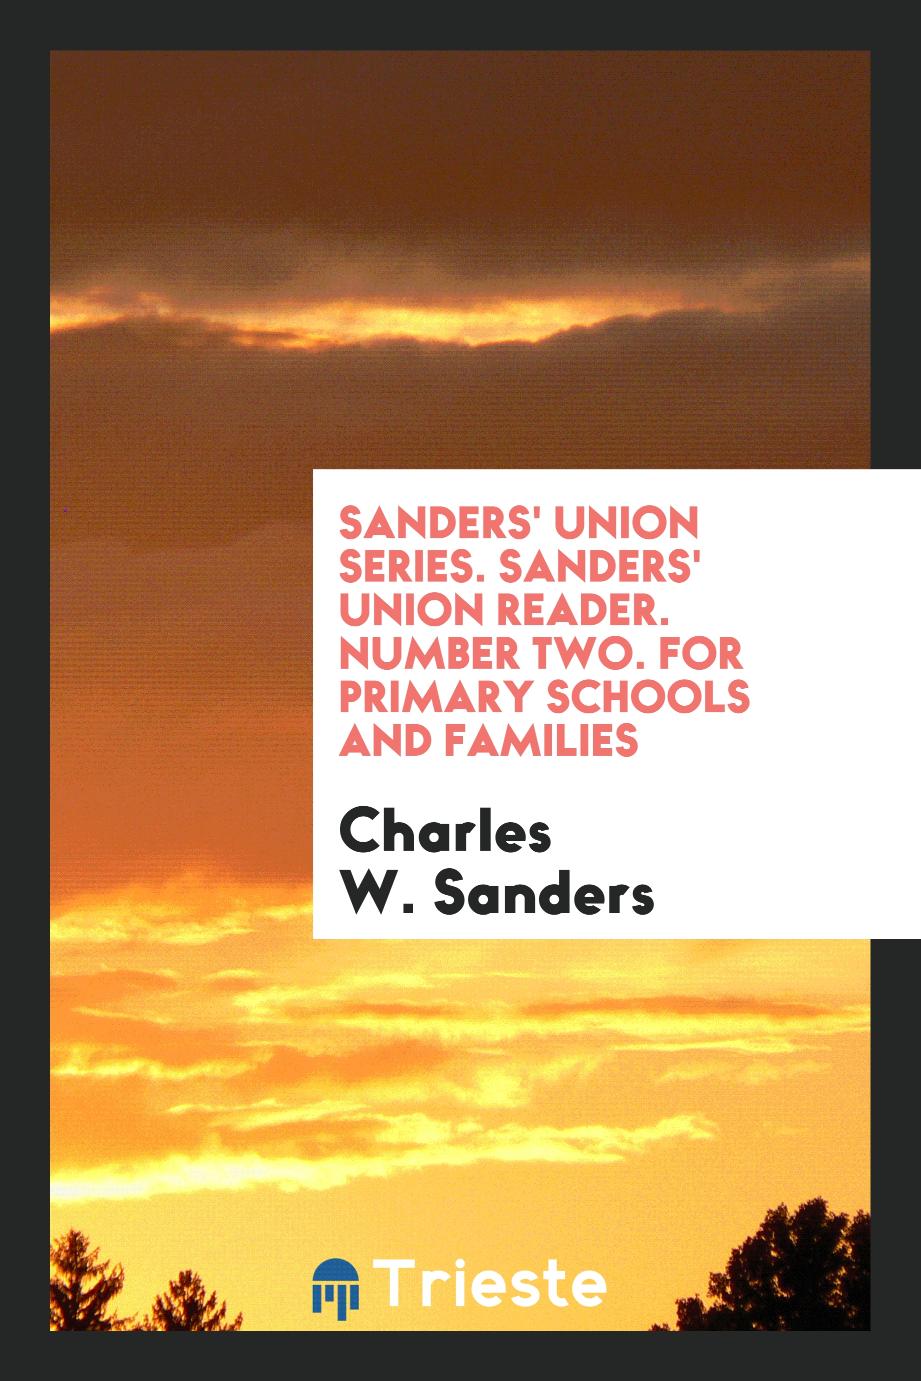 Sanders' Union Series. Sanders' Union Reader. Number Two. For Primary Schools and Families